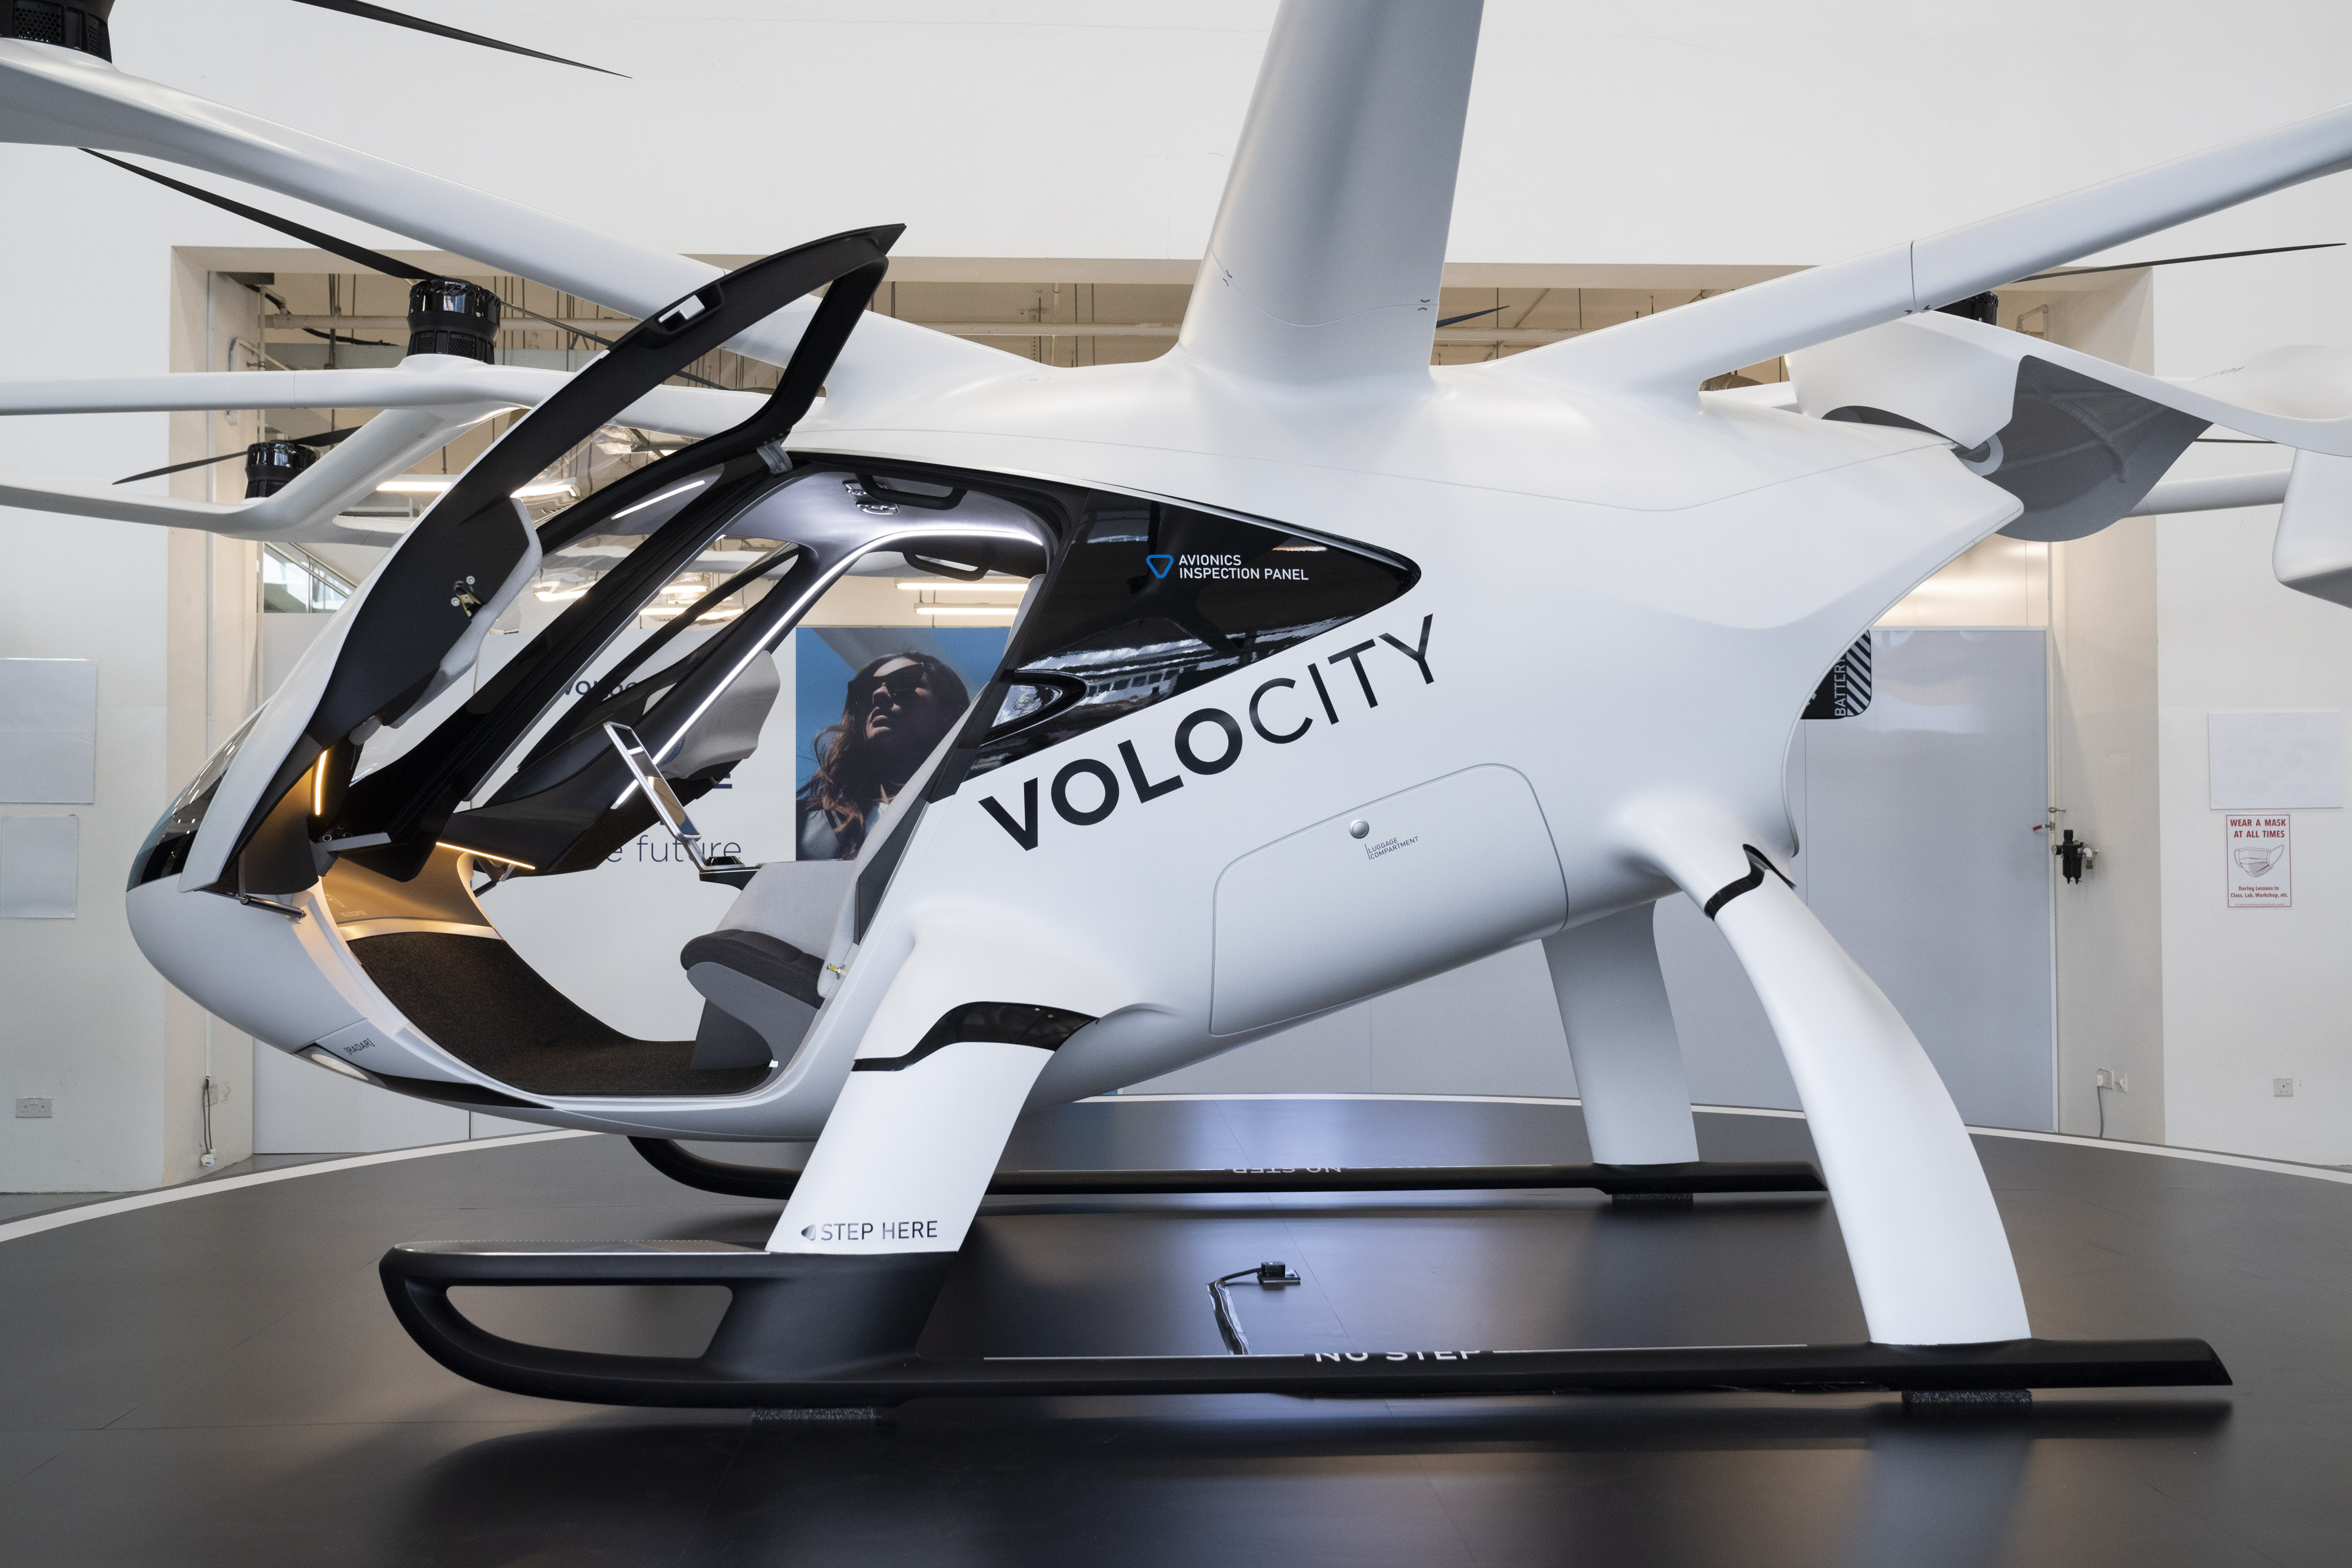 A VoloCity air taxi by Volocopter.